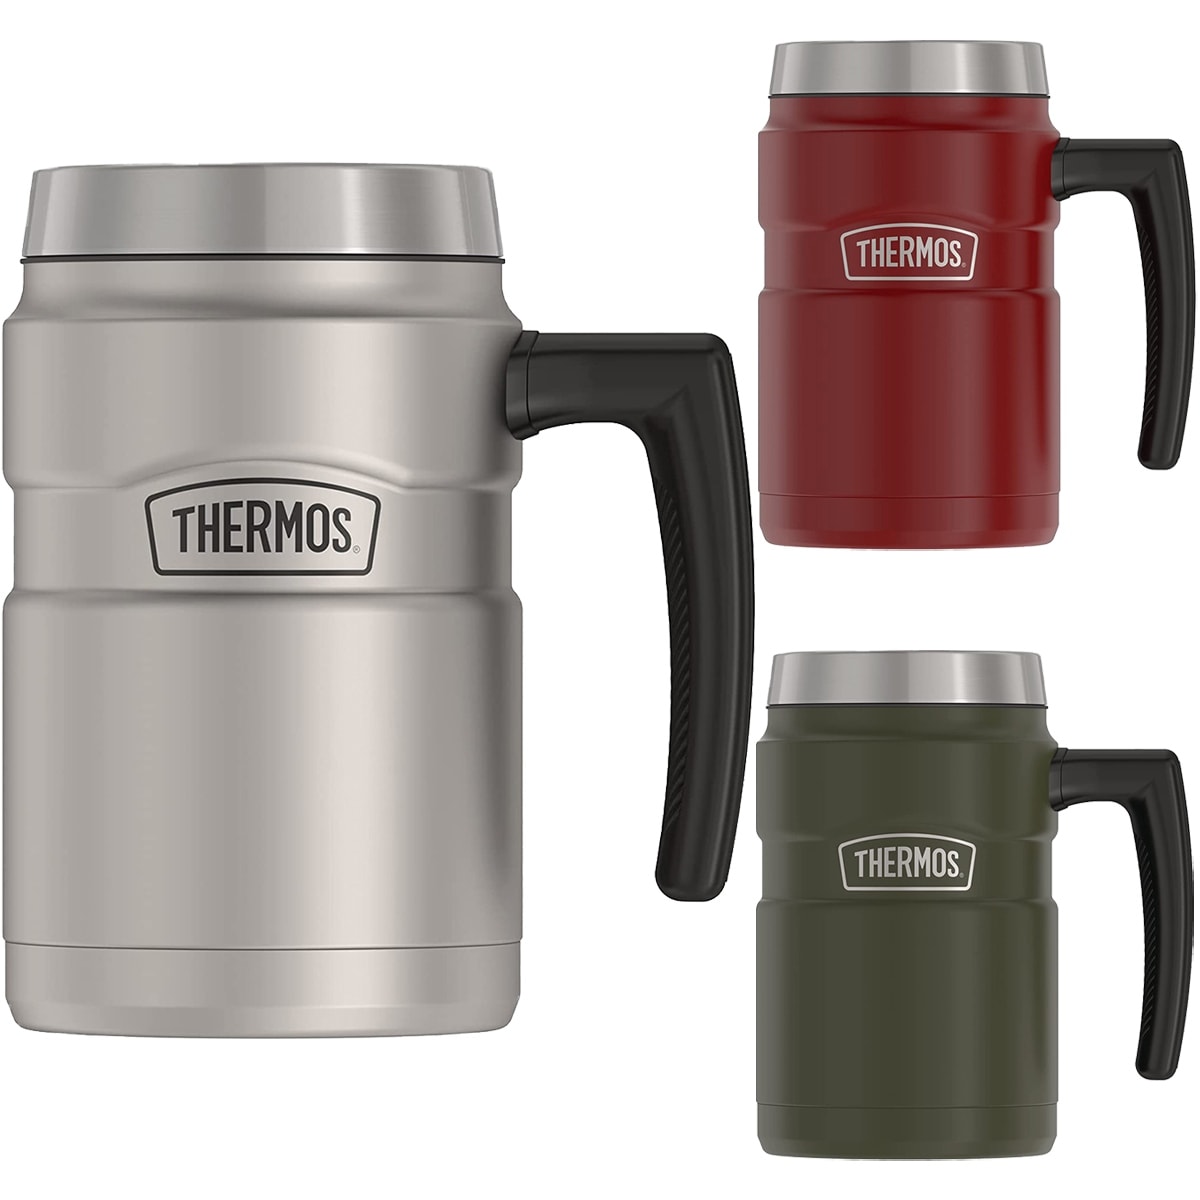 https://ak1.ostkcdn.com/images/products/is/images/direct/500b9657e934e1750c67493b5e81b07f76c54eae/Thermos-16-oz.-Stainless-King-Insulated-Stainless-Steel-Coffee-Mug.jpg